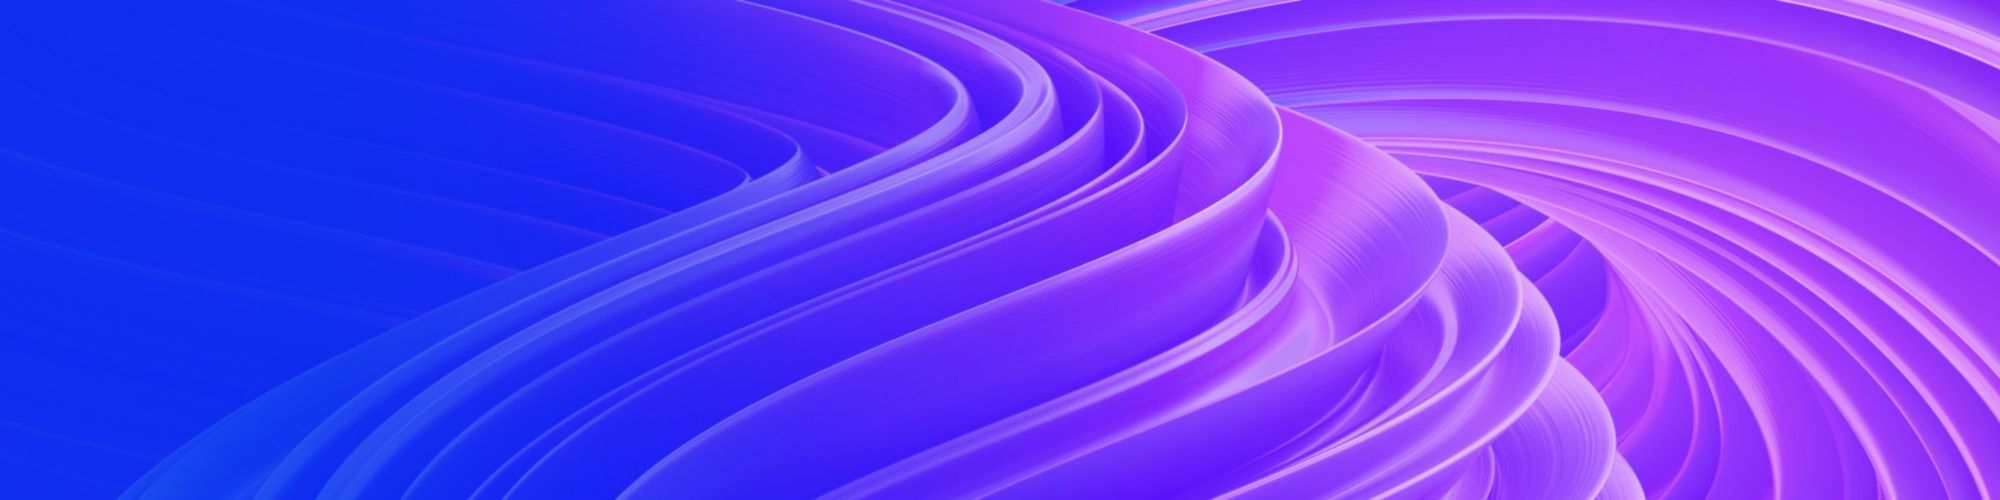 Blue purple abstract wave